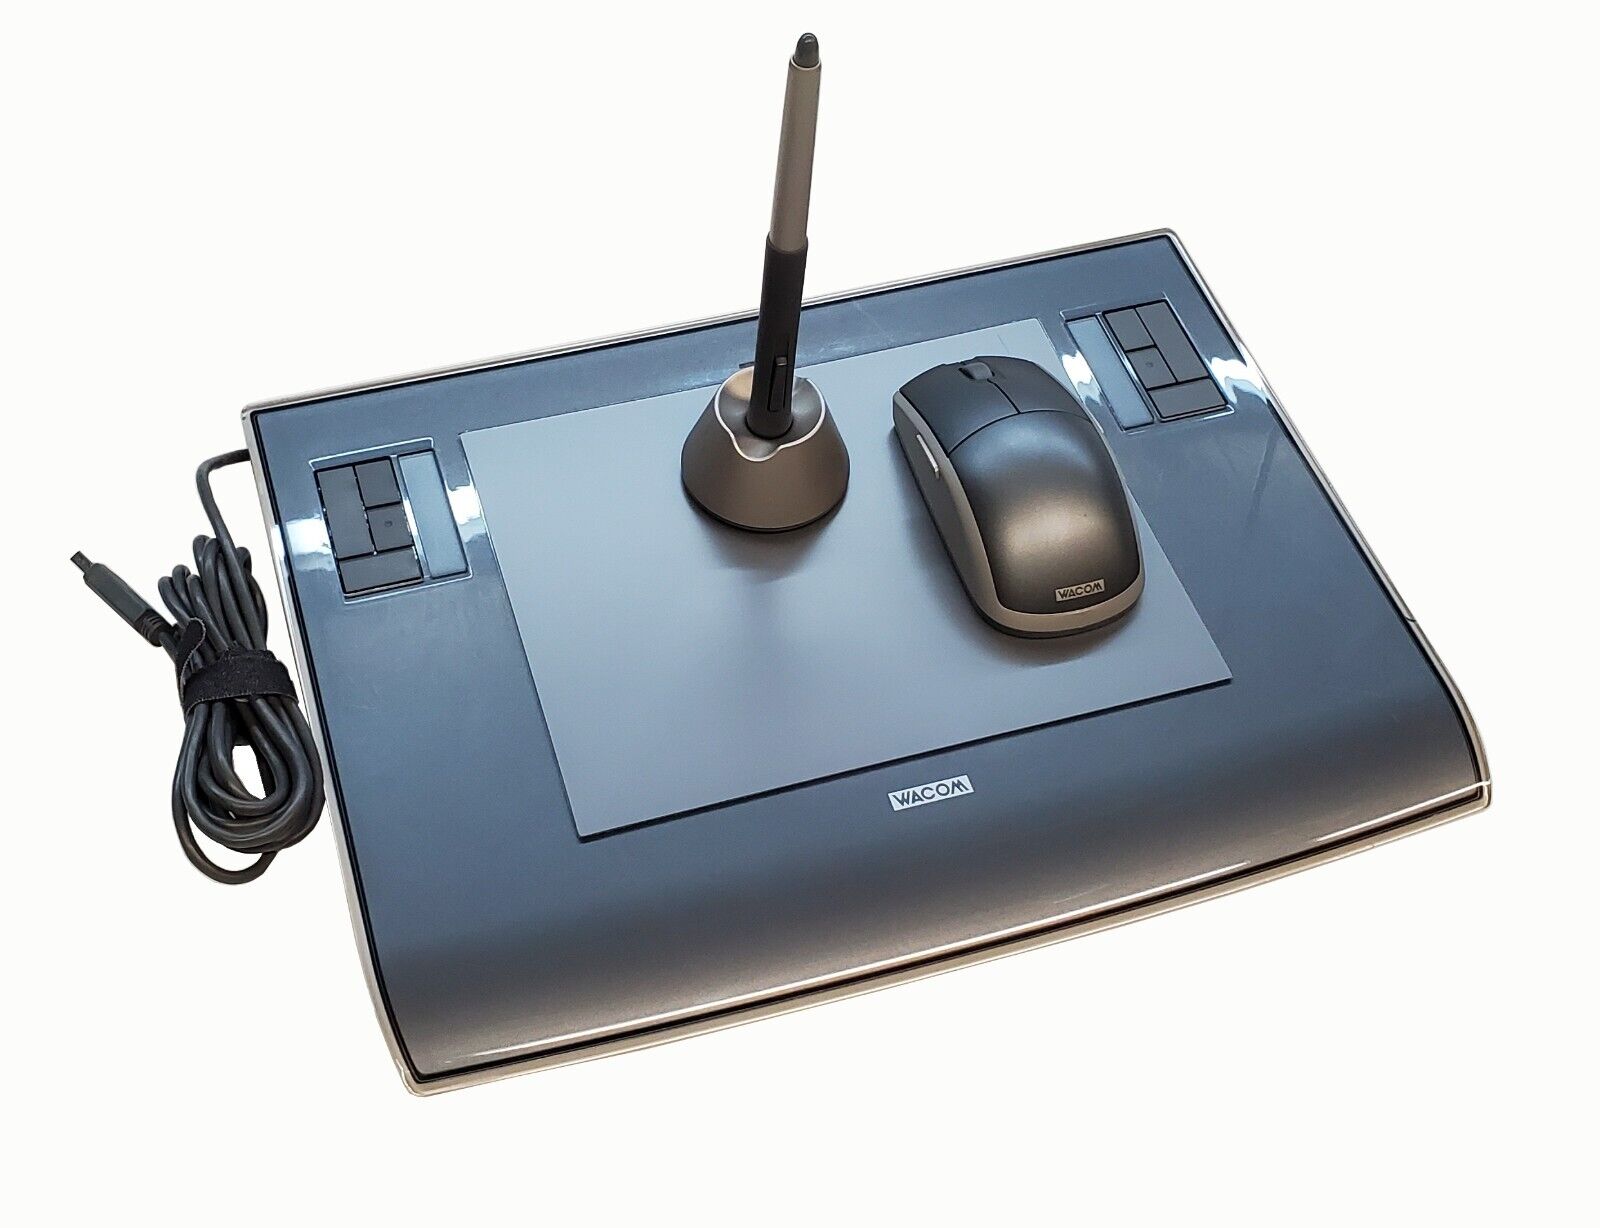 Wacom Intuos 3 PTZ-630 Graphics Tablet with Pen and Wireless Mouse 